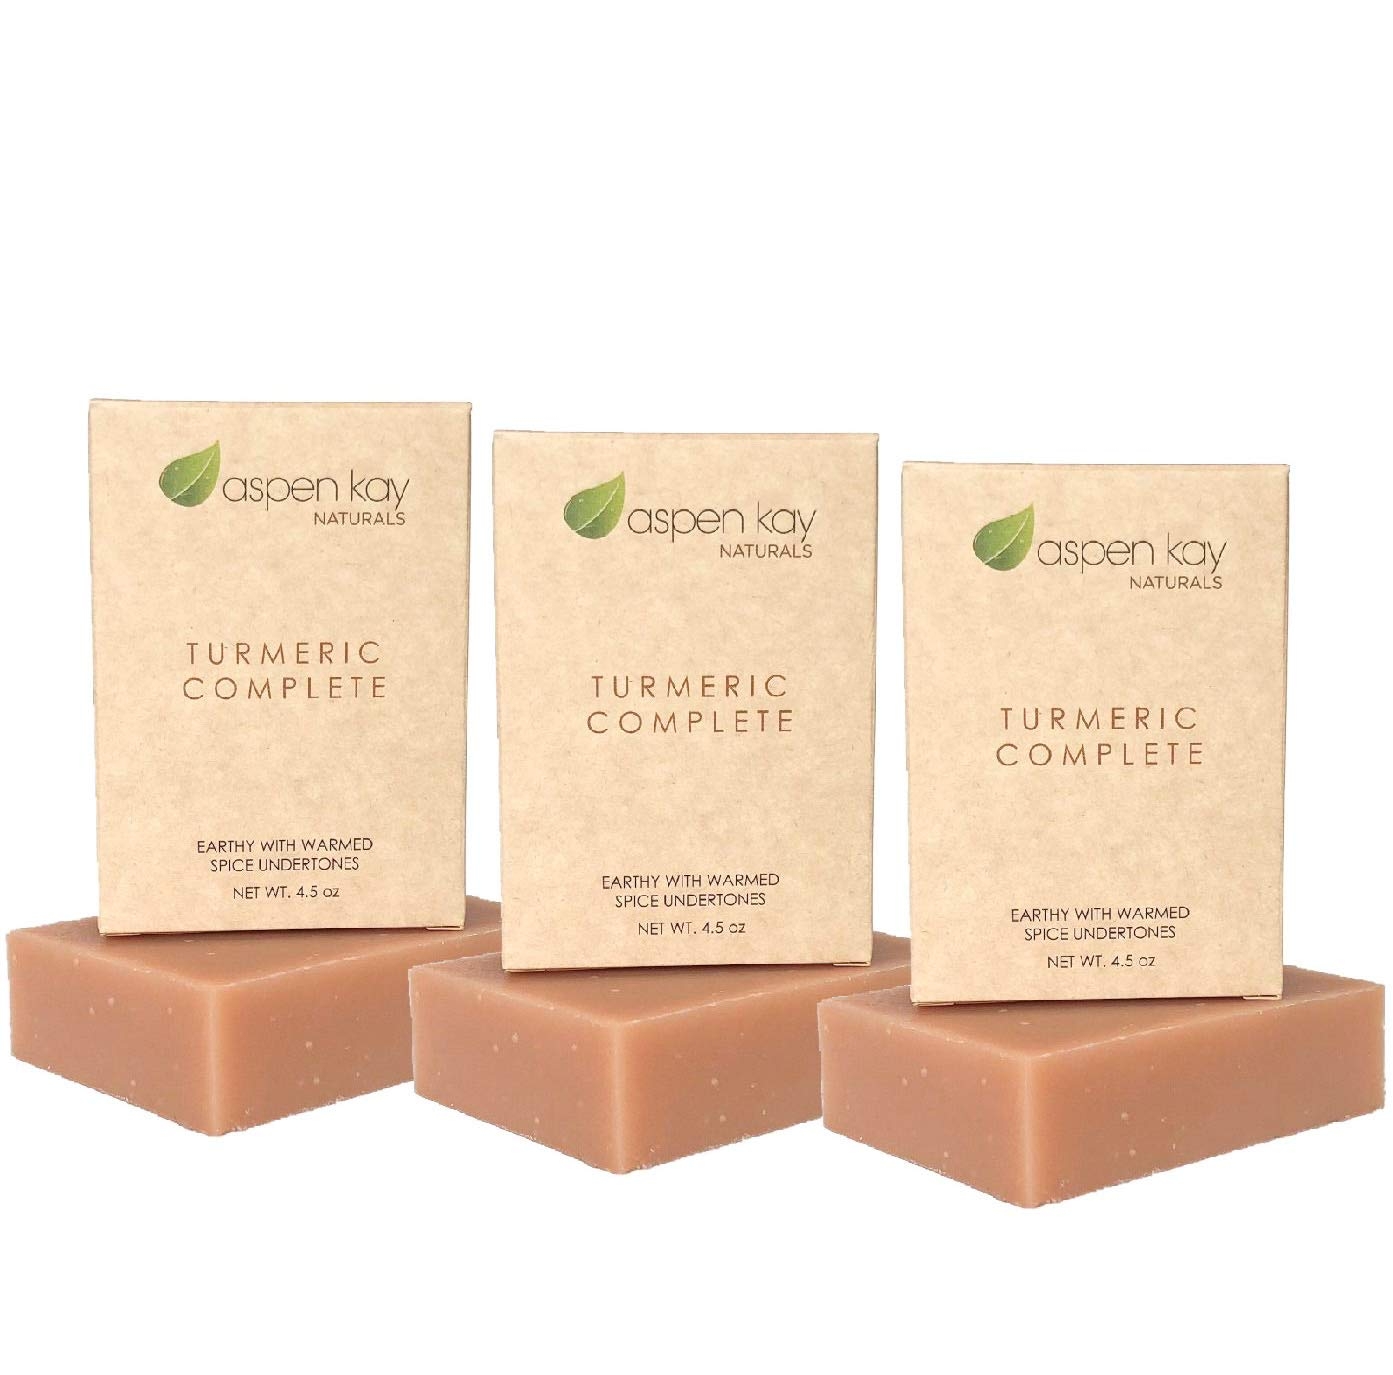 Turmeric Soap - Made with Natural and Organic Ingredients. Gentle Soap. 4.5oz Bar. (Turmeric Complete 3 Pack)